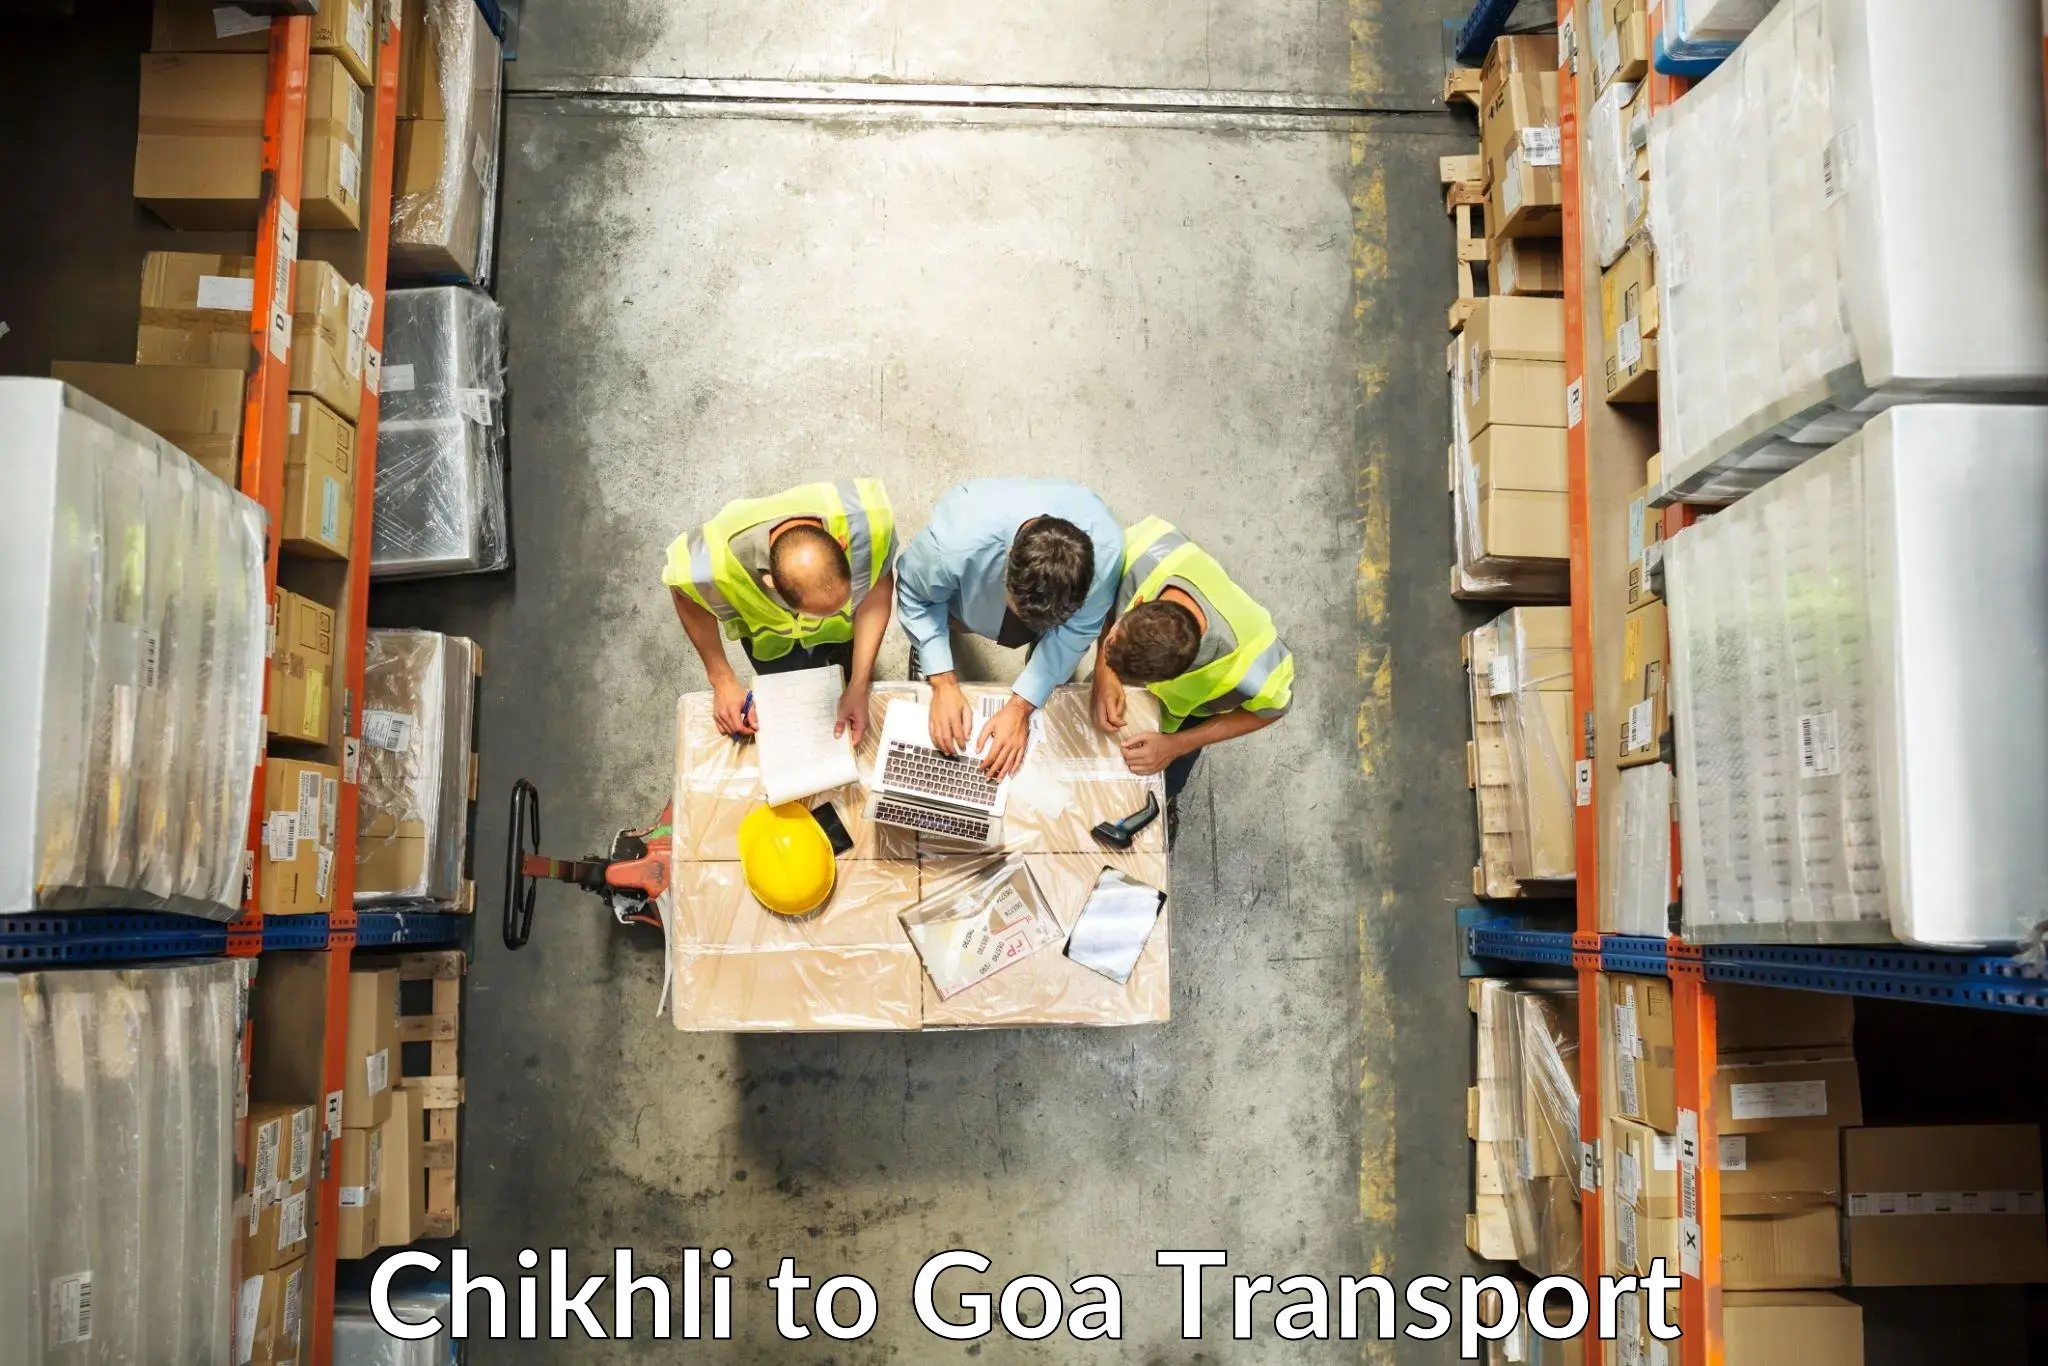 Delivery service Chikhli to Goa